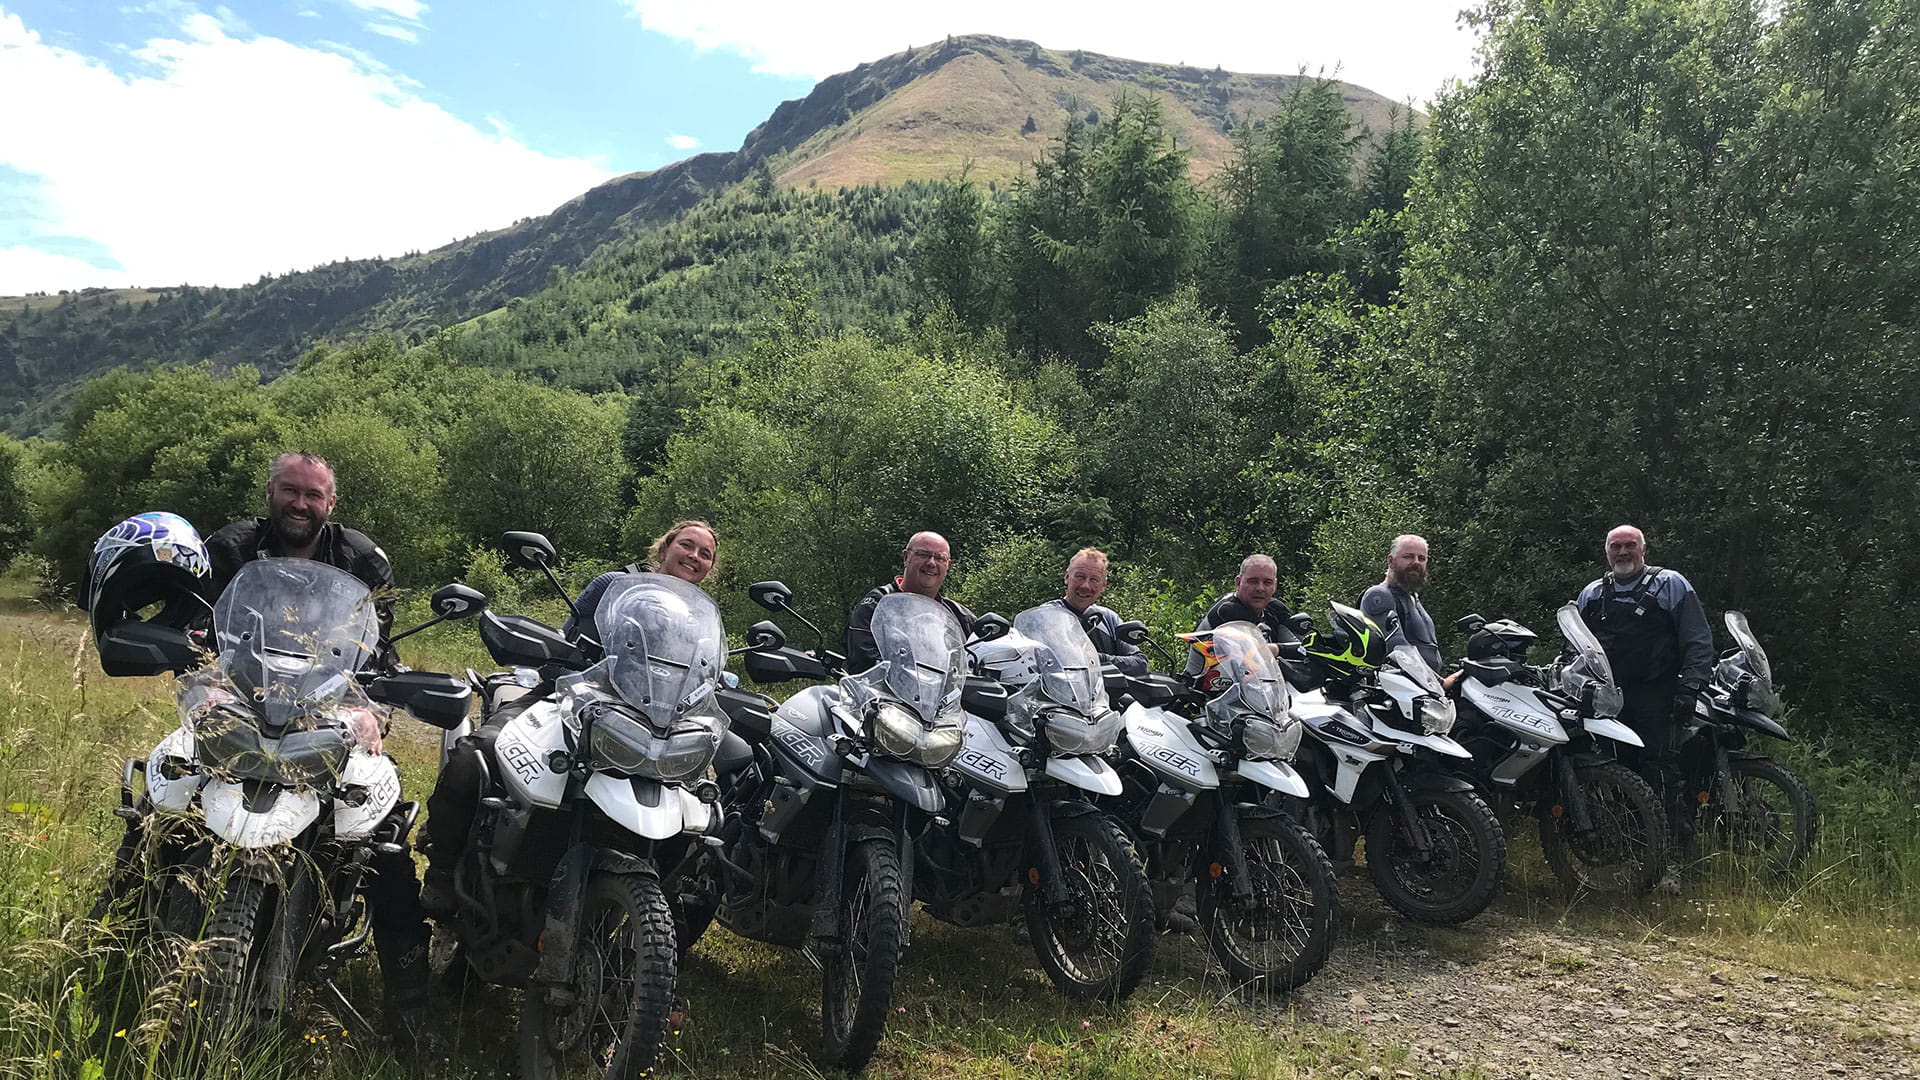 A group of riders on Triumph Tiger motorcycles during an experience day